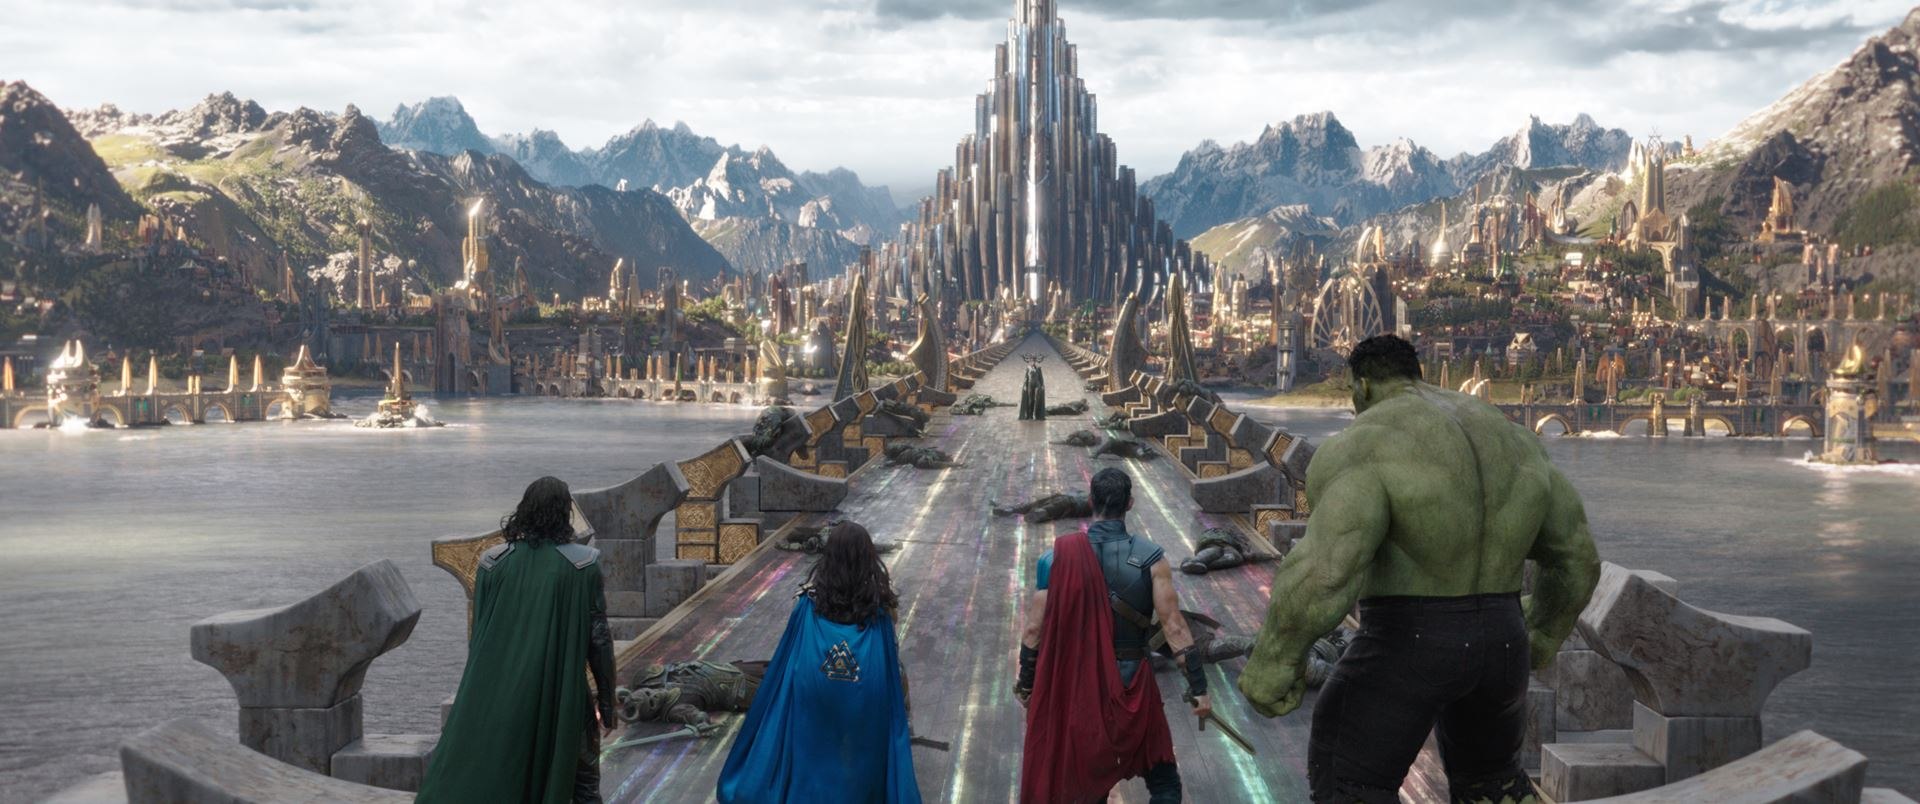 Thor: Ragnarok' blends action and comedy perfectly